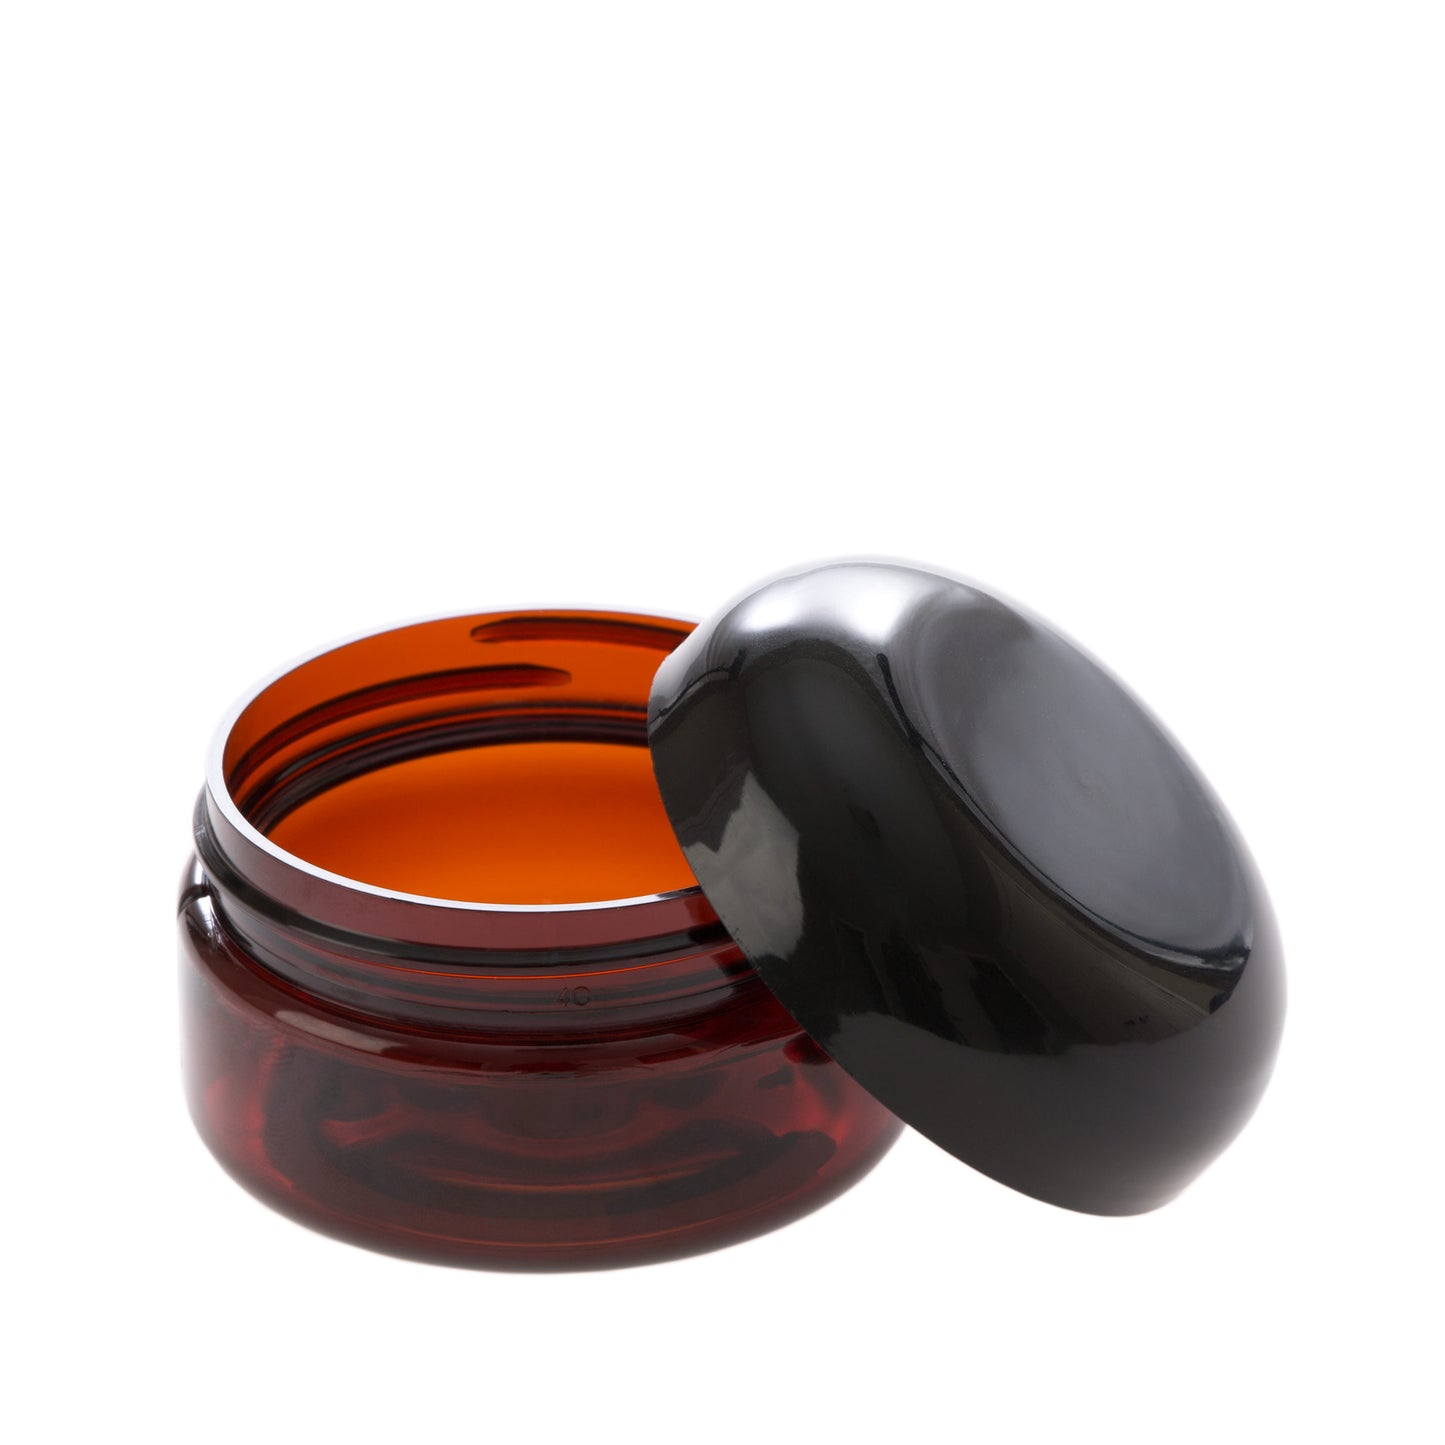 2 oz Amber Shallow Jar with Black Dome Cap